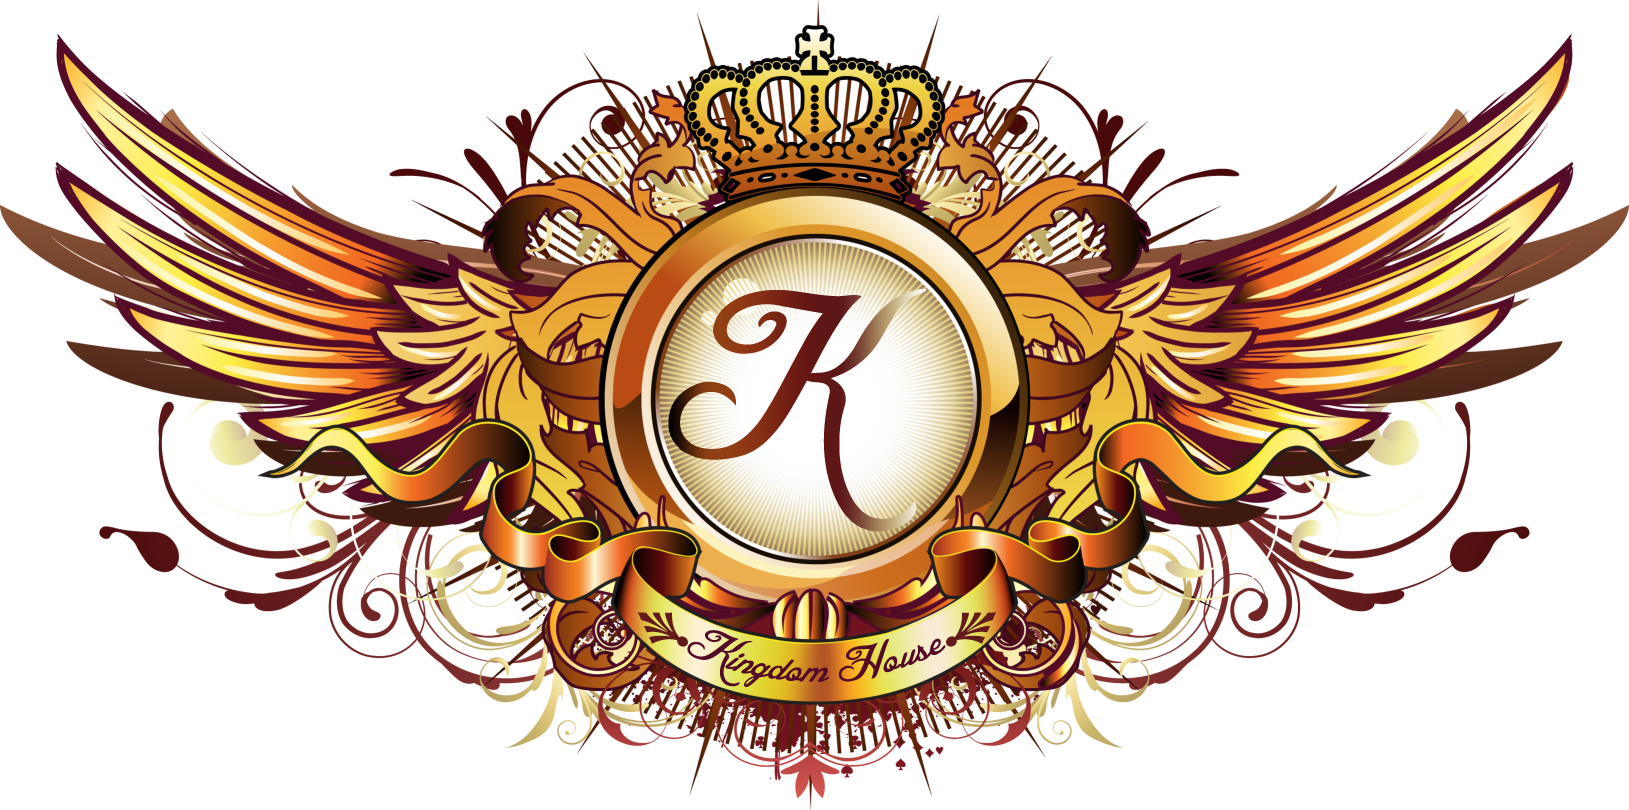 Kingdom House Addiction Recovery - Banner Photo Frame Png (1629x810)